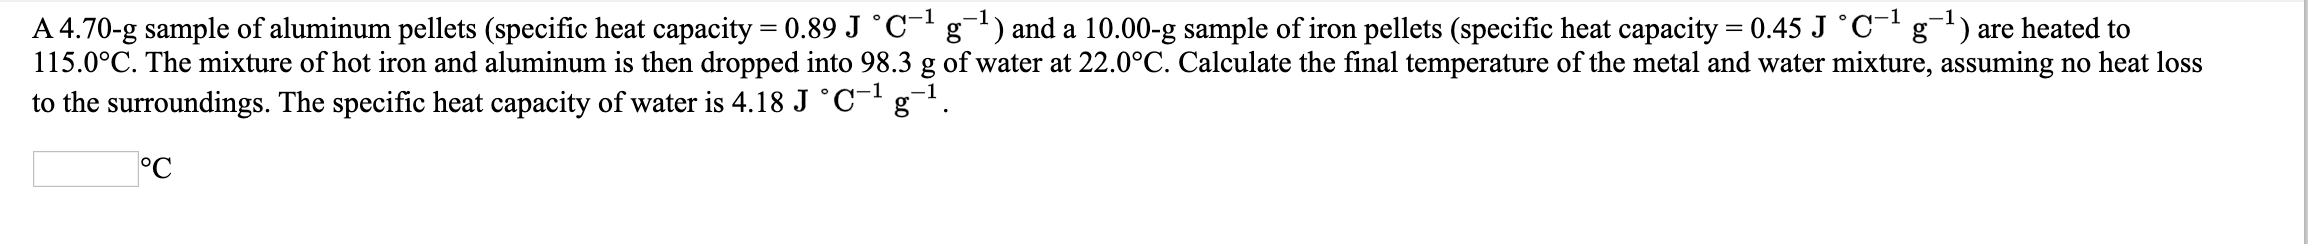 A 4.70-g sample of aluminum pellets (specific heat capacity = 0.89 J °C- g) and a 10.00-g sample of iron pellets (specific heat capacity = 0.45 J °C- g) are heated to
115.0°C. The mixture of hot iron and aluminum is then dropped into 98.3 g of water at 22.0°C. Calculate the final temperature of the metal and water mixture, assuming no heat loss
to the surroundings. The specific heat capacity of water is 4.18 J °C¯'g¬!
°C
